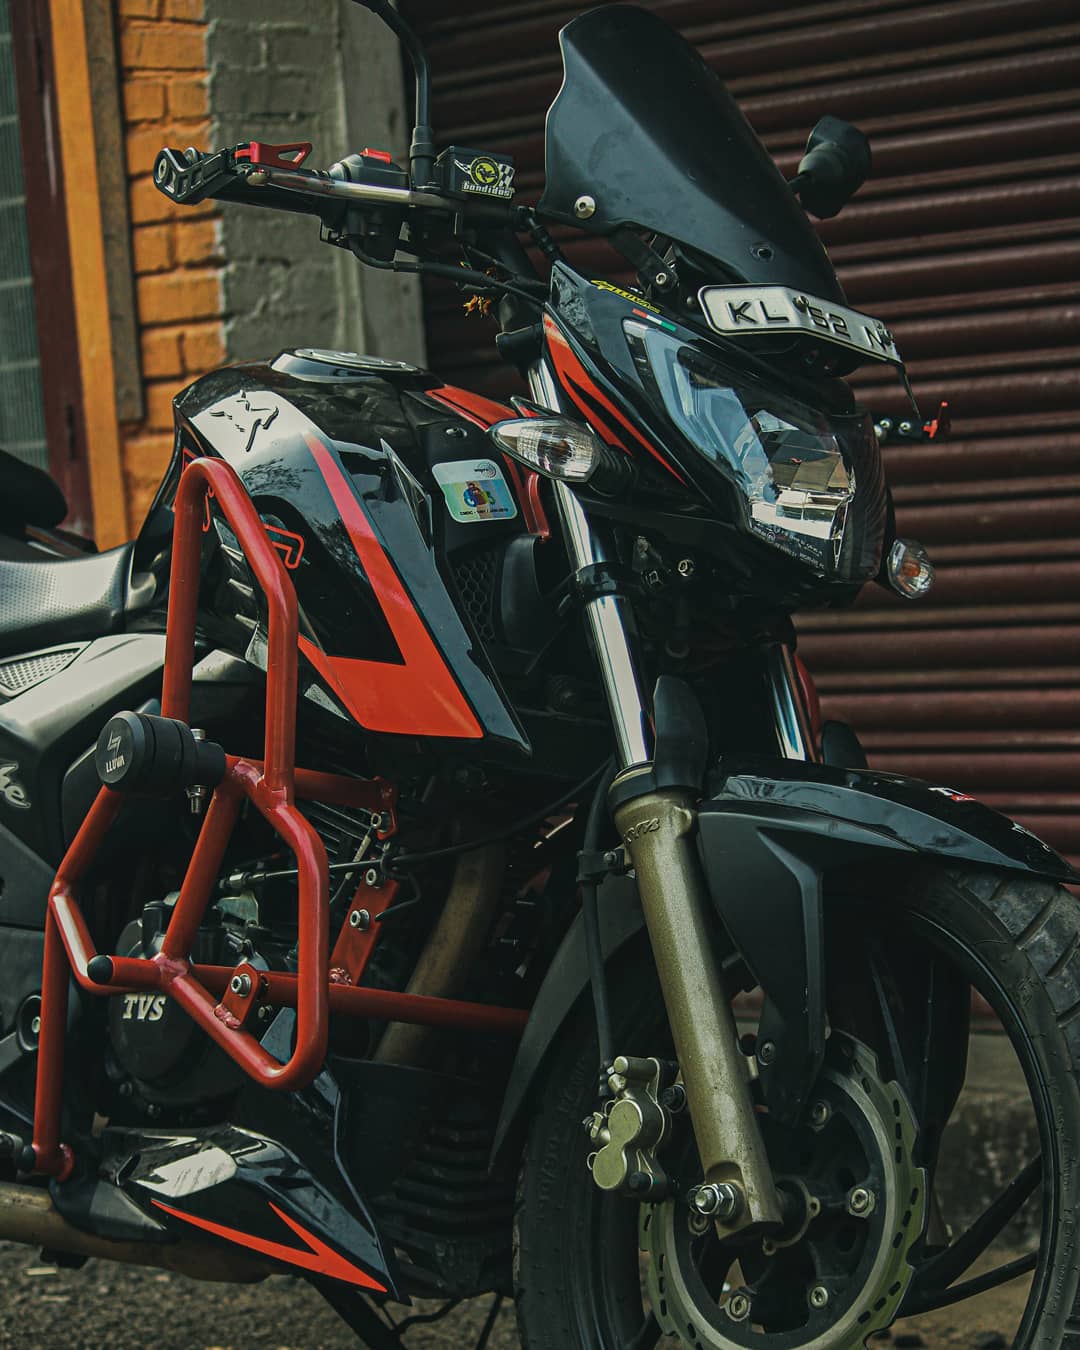 This TVS Apache RTR 200 is Equipped with Must-Have Touring Accessories - close-up